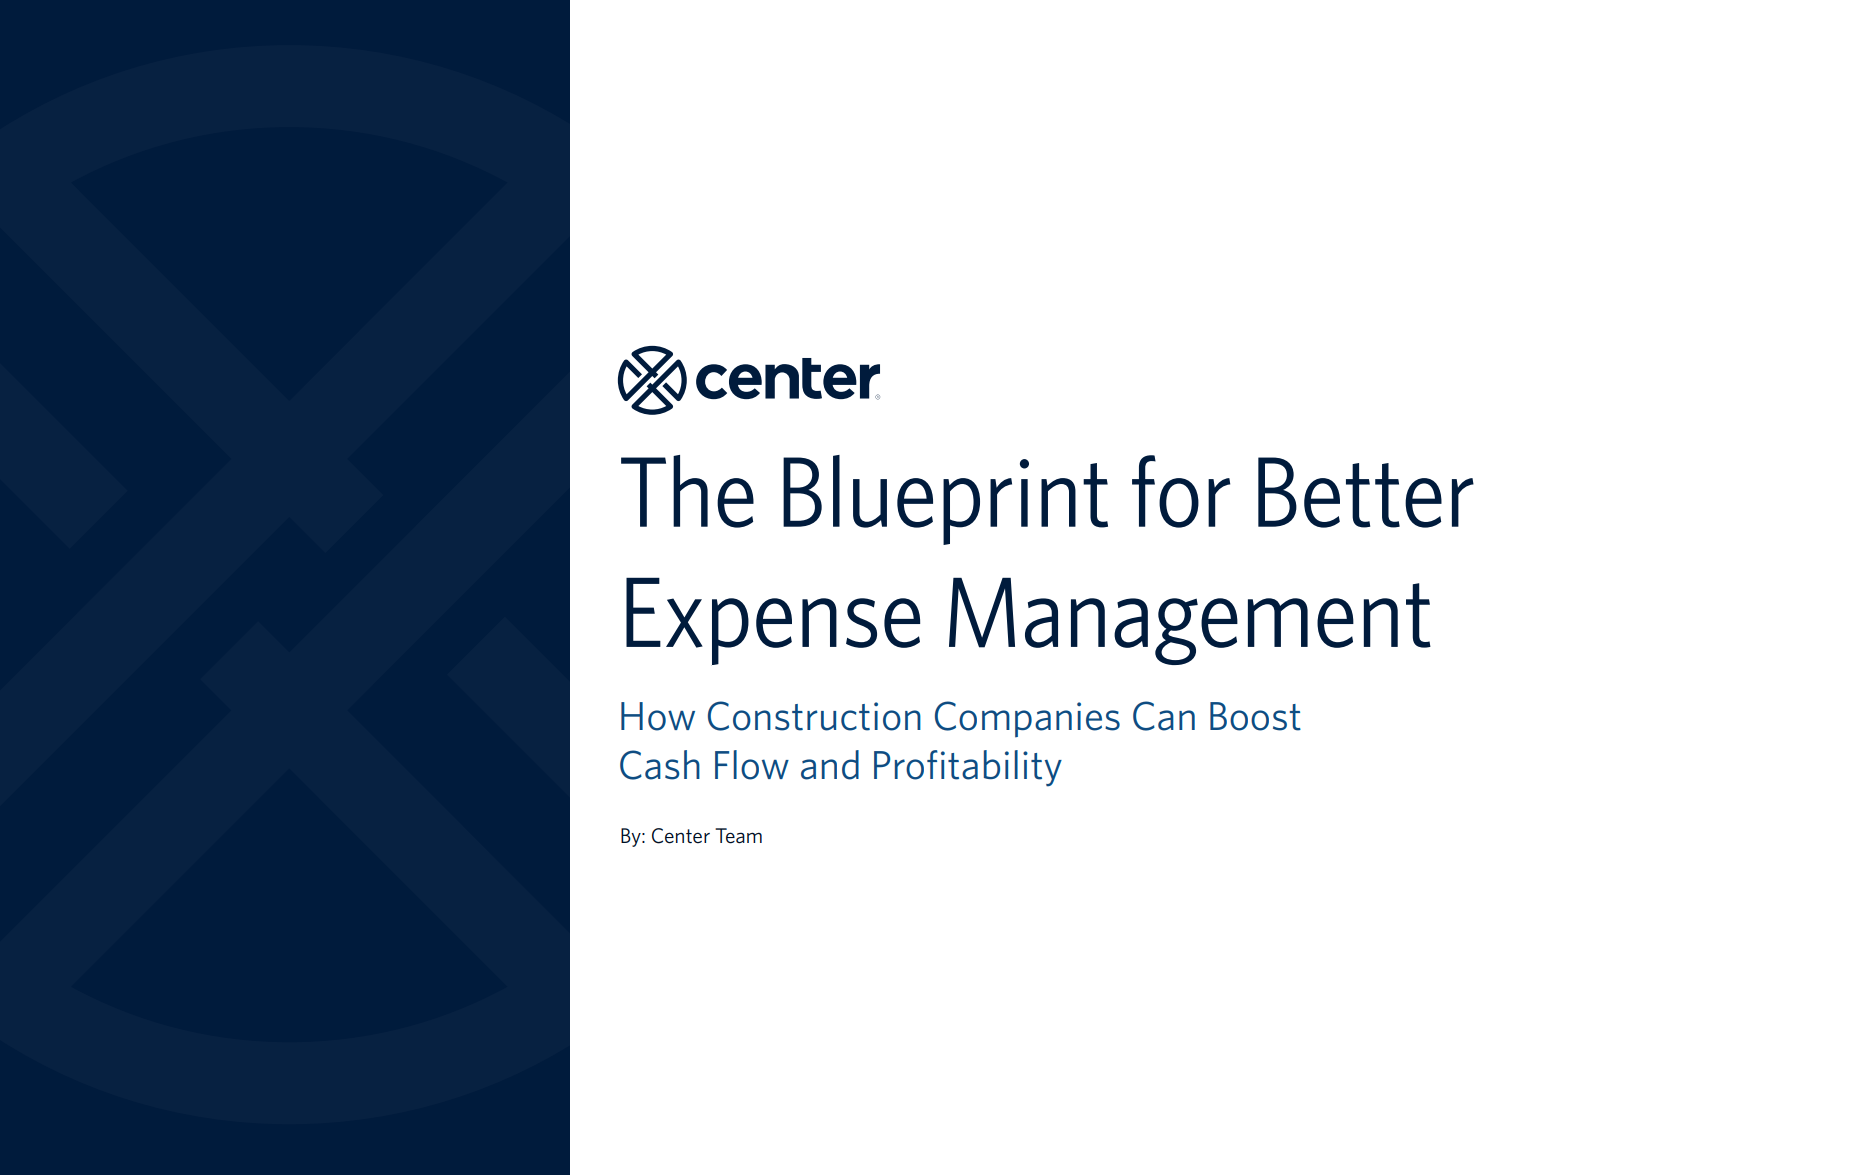 The Blueprint for Better Expense Management for Construction Companies PDF.